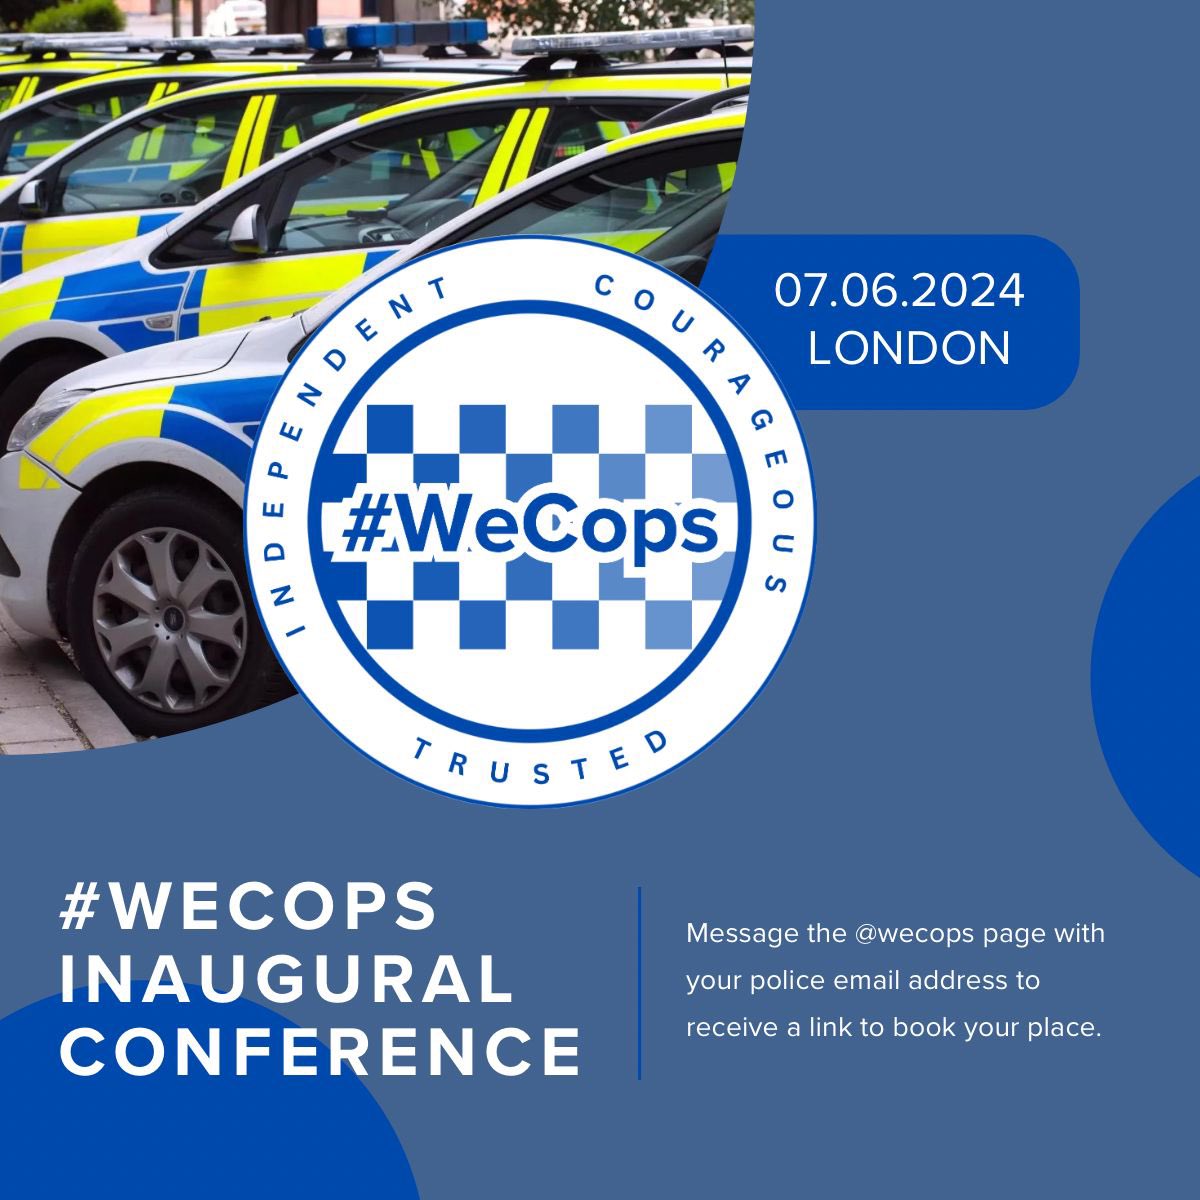 Great @wecops planning meeting today. Everything coming together for our inaugural conference in June. Great host in @TomGaymor & great speakers including @ACPippaMills @rickmuir1 @TVP_ACC @WecopsCaroline @EmWilliamsOU @BJH251 @CumbriaChief & @Brick_Cop who will bring Lego!!